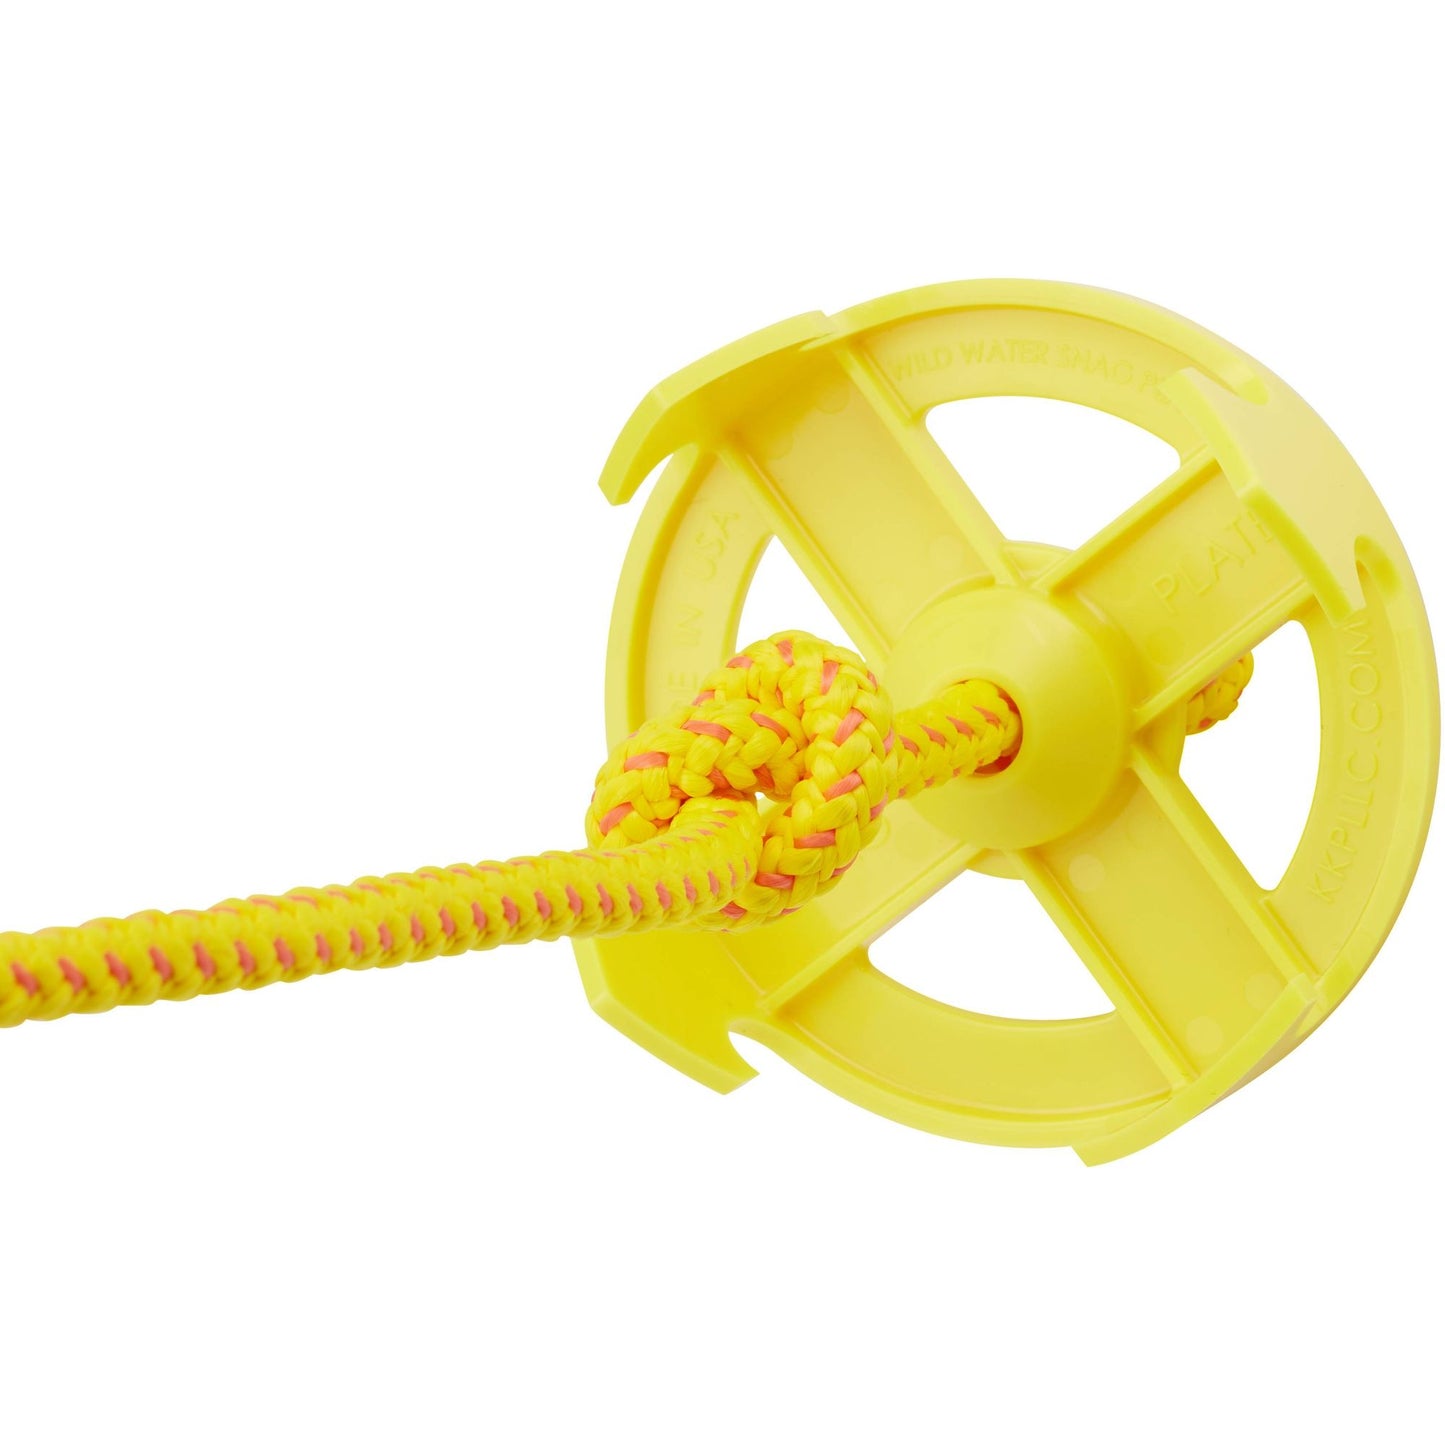 A yellow Wild Water Snag Plate with a rope attached to it, designed for swiftwater rescue scenarios.